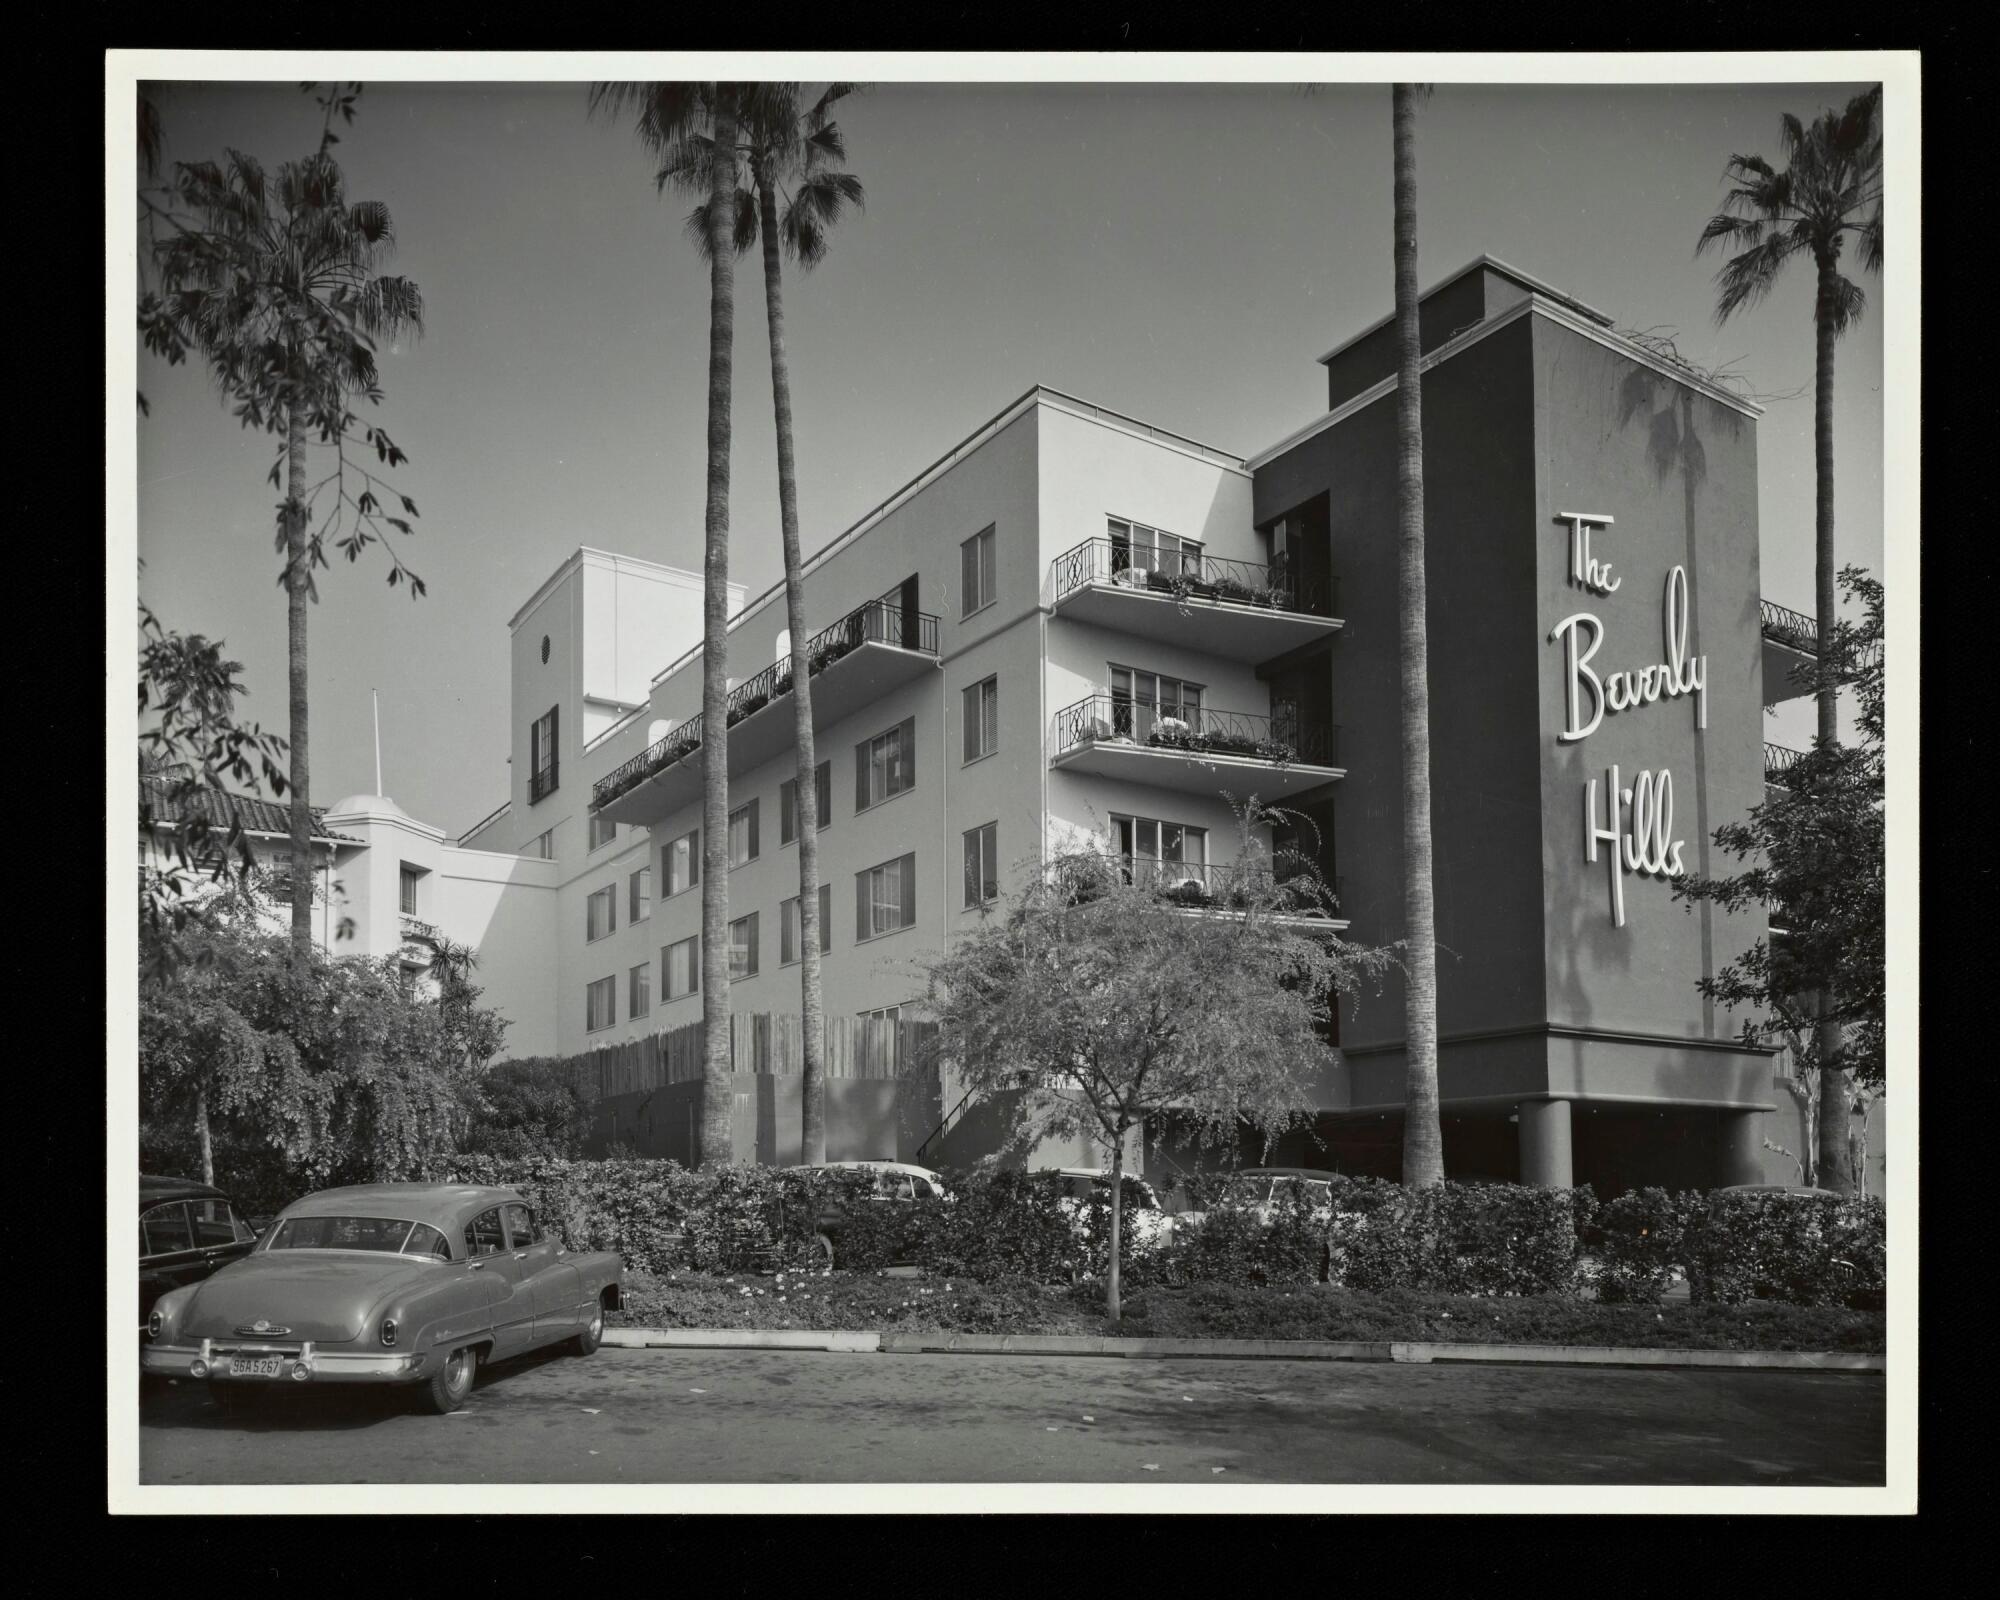 A black-and-white photo shows the Modern wing of the Beverly Hills Hotel with the hotel's name on the façade.